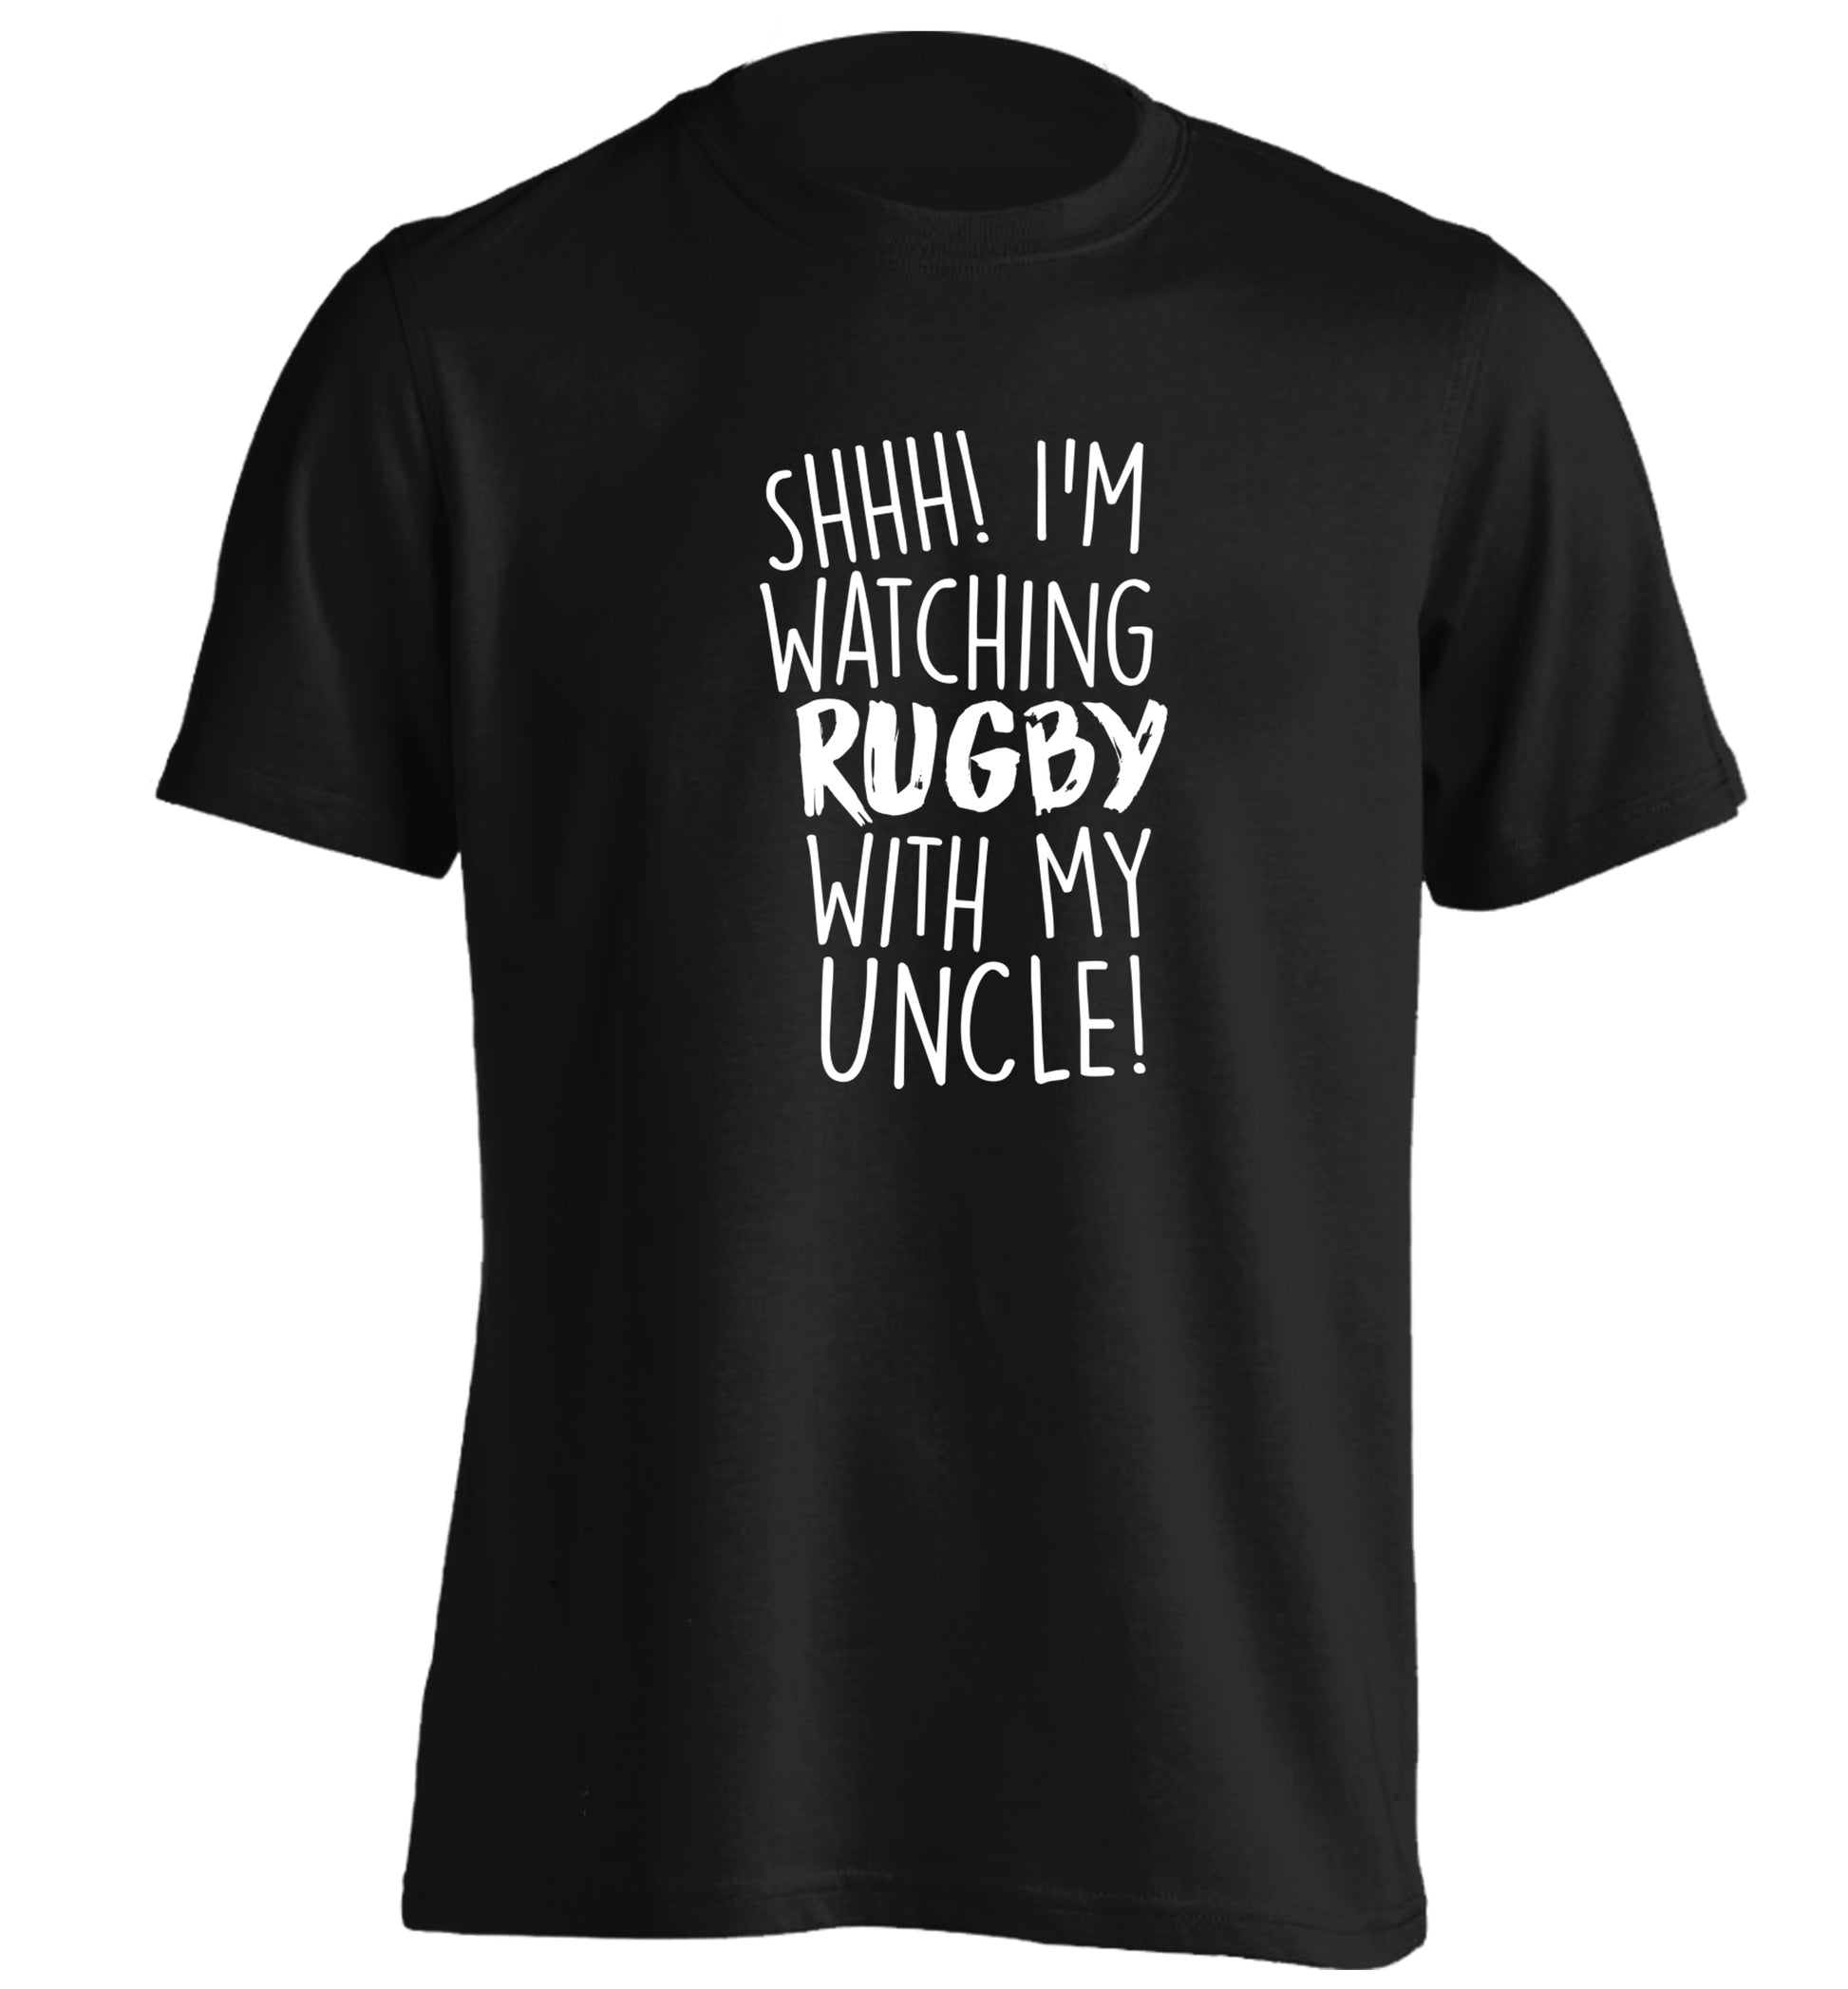 Shh.. I'm watching rugby with my uncle adults unisex black Tshirt 2XL